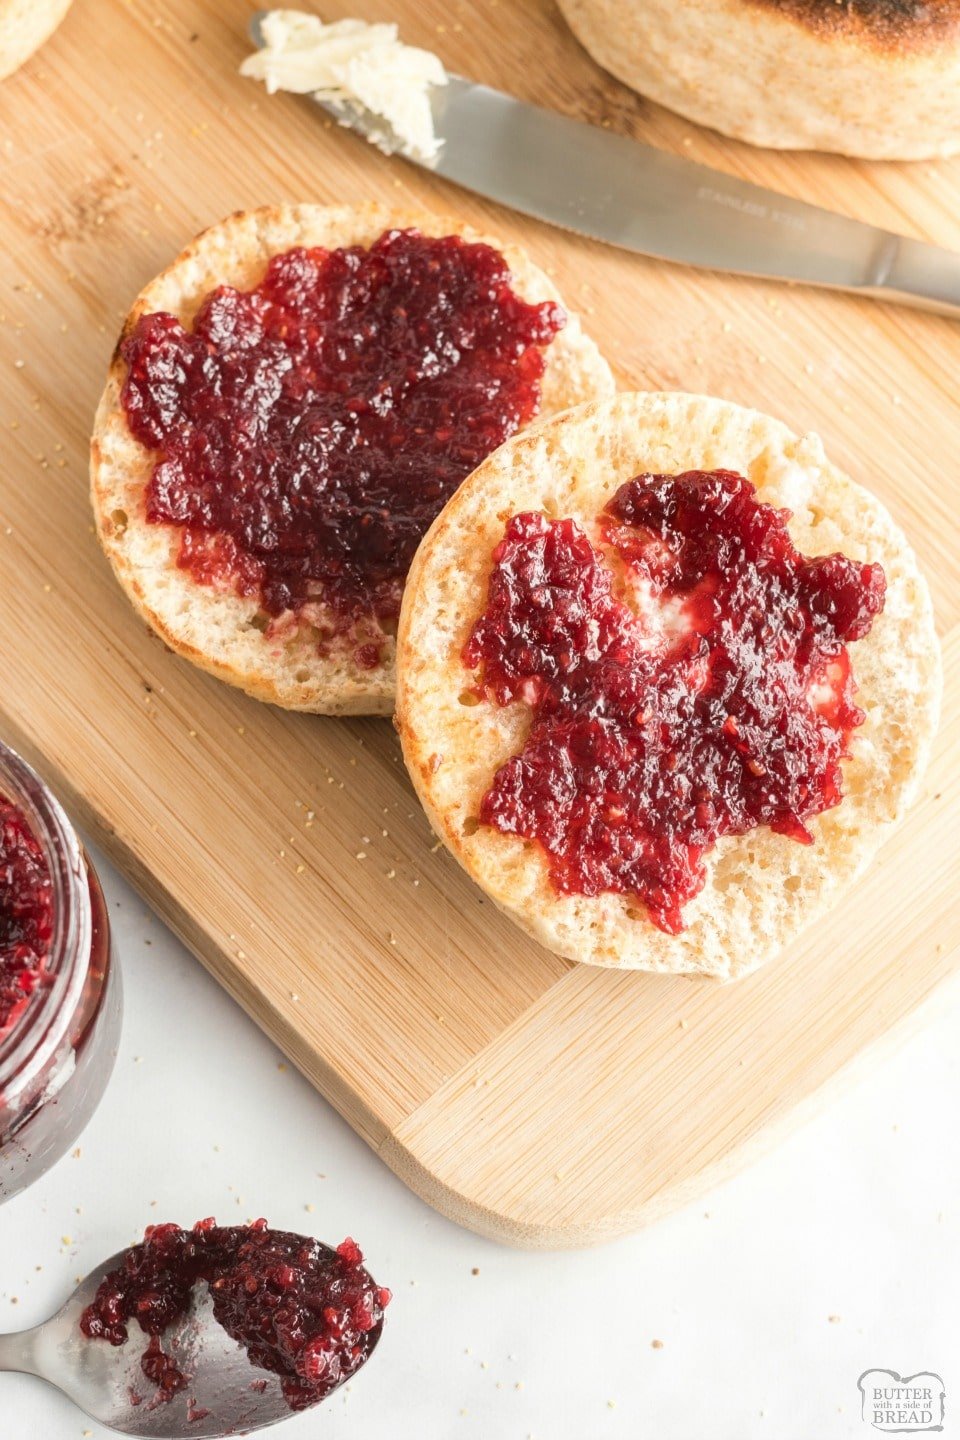 Homemade English Muffins are so simple to make that you’ll never want to buy store-bought again. Fluffy English muffin recipe full of nooks and crannies! You’ll love everything from the smell to the textures and flavors.